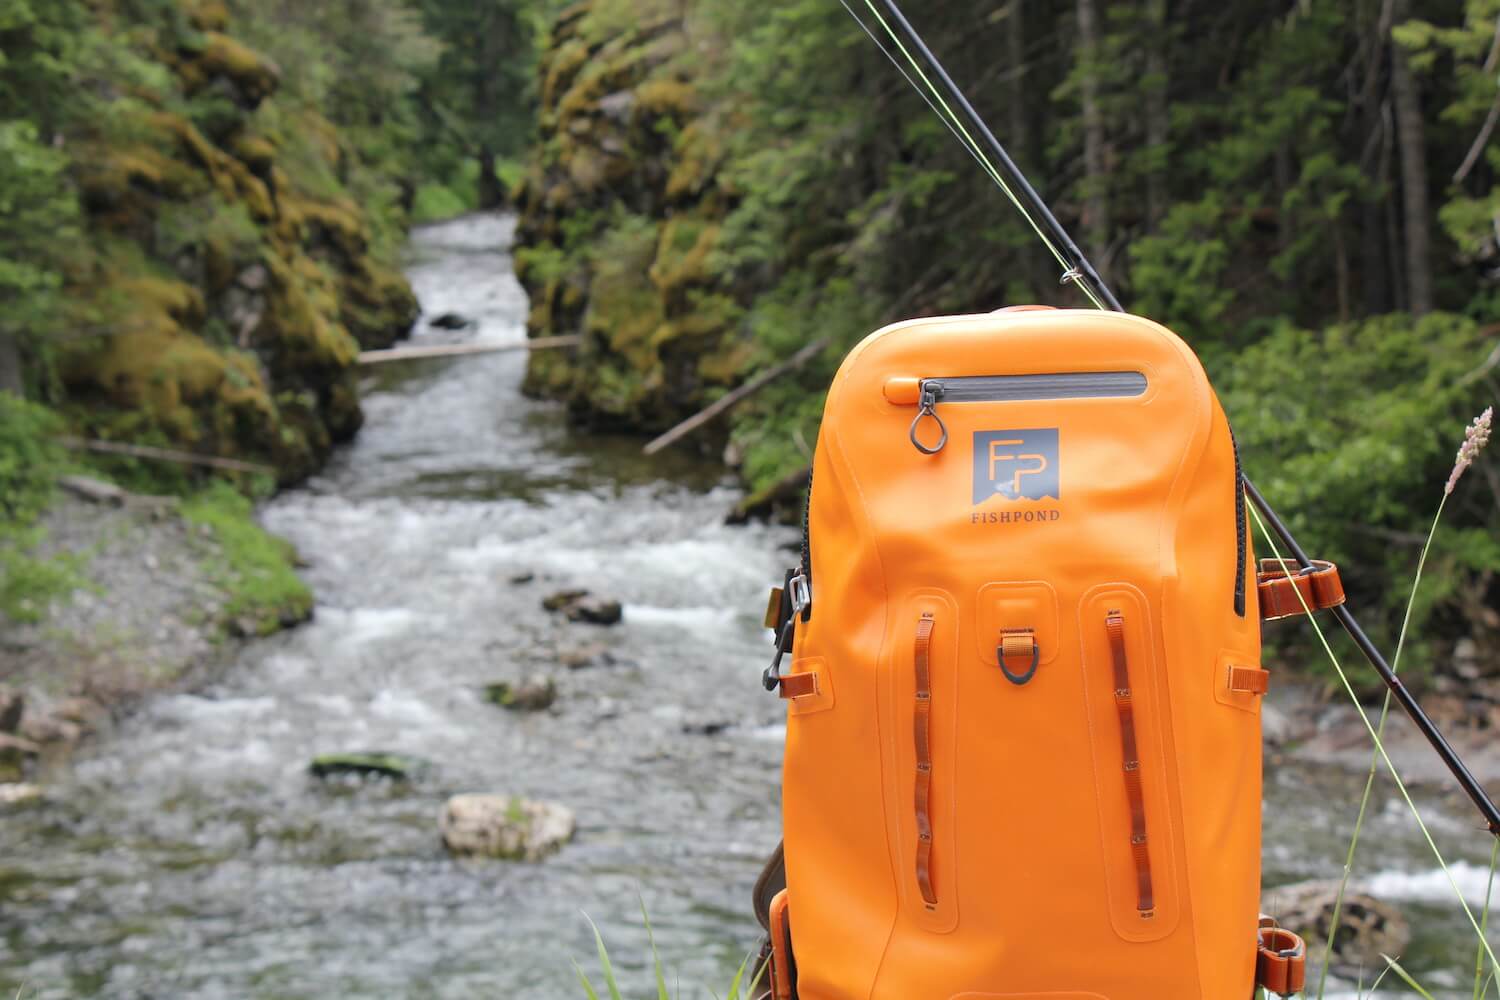 This photo shows a waterproof fishing backpack near a river and stream.